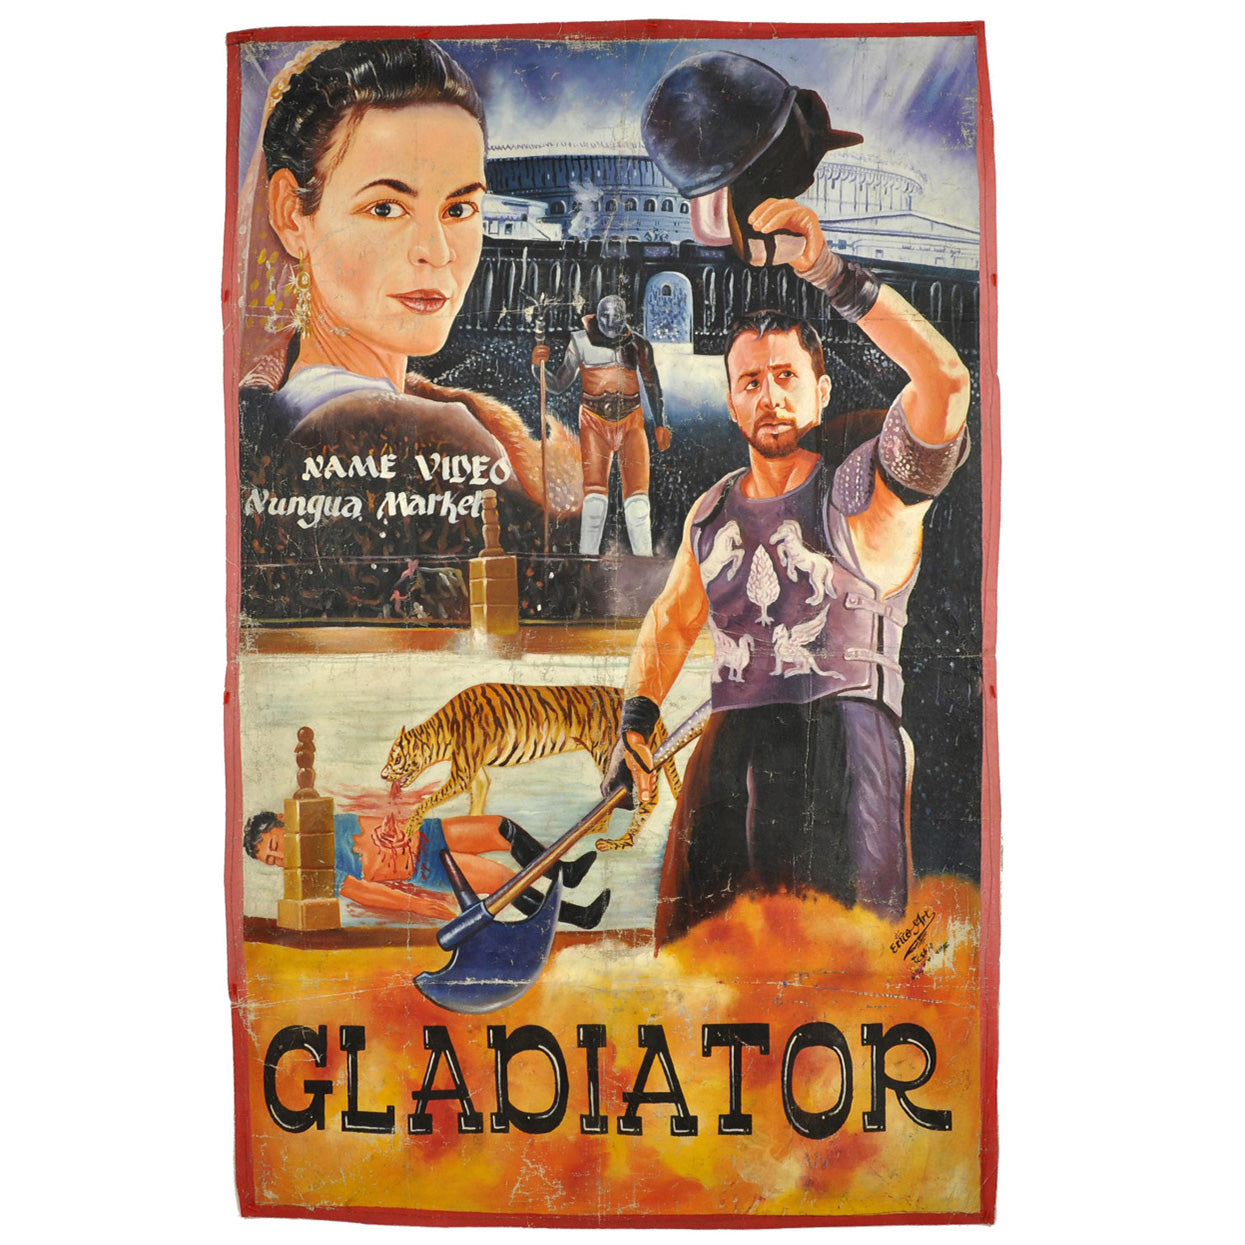 GLADIATOR MOVIE POSTER HAND PAINTED ON RECYCLED FLOUR SACK IN GHANA FOR THE LOCAL CINEMA